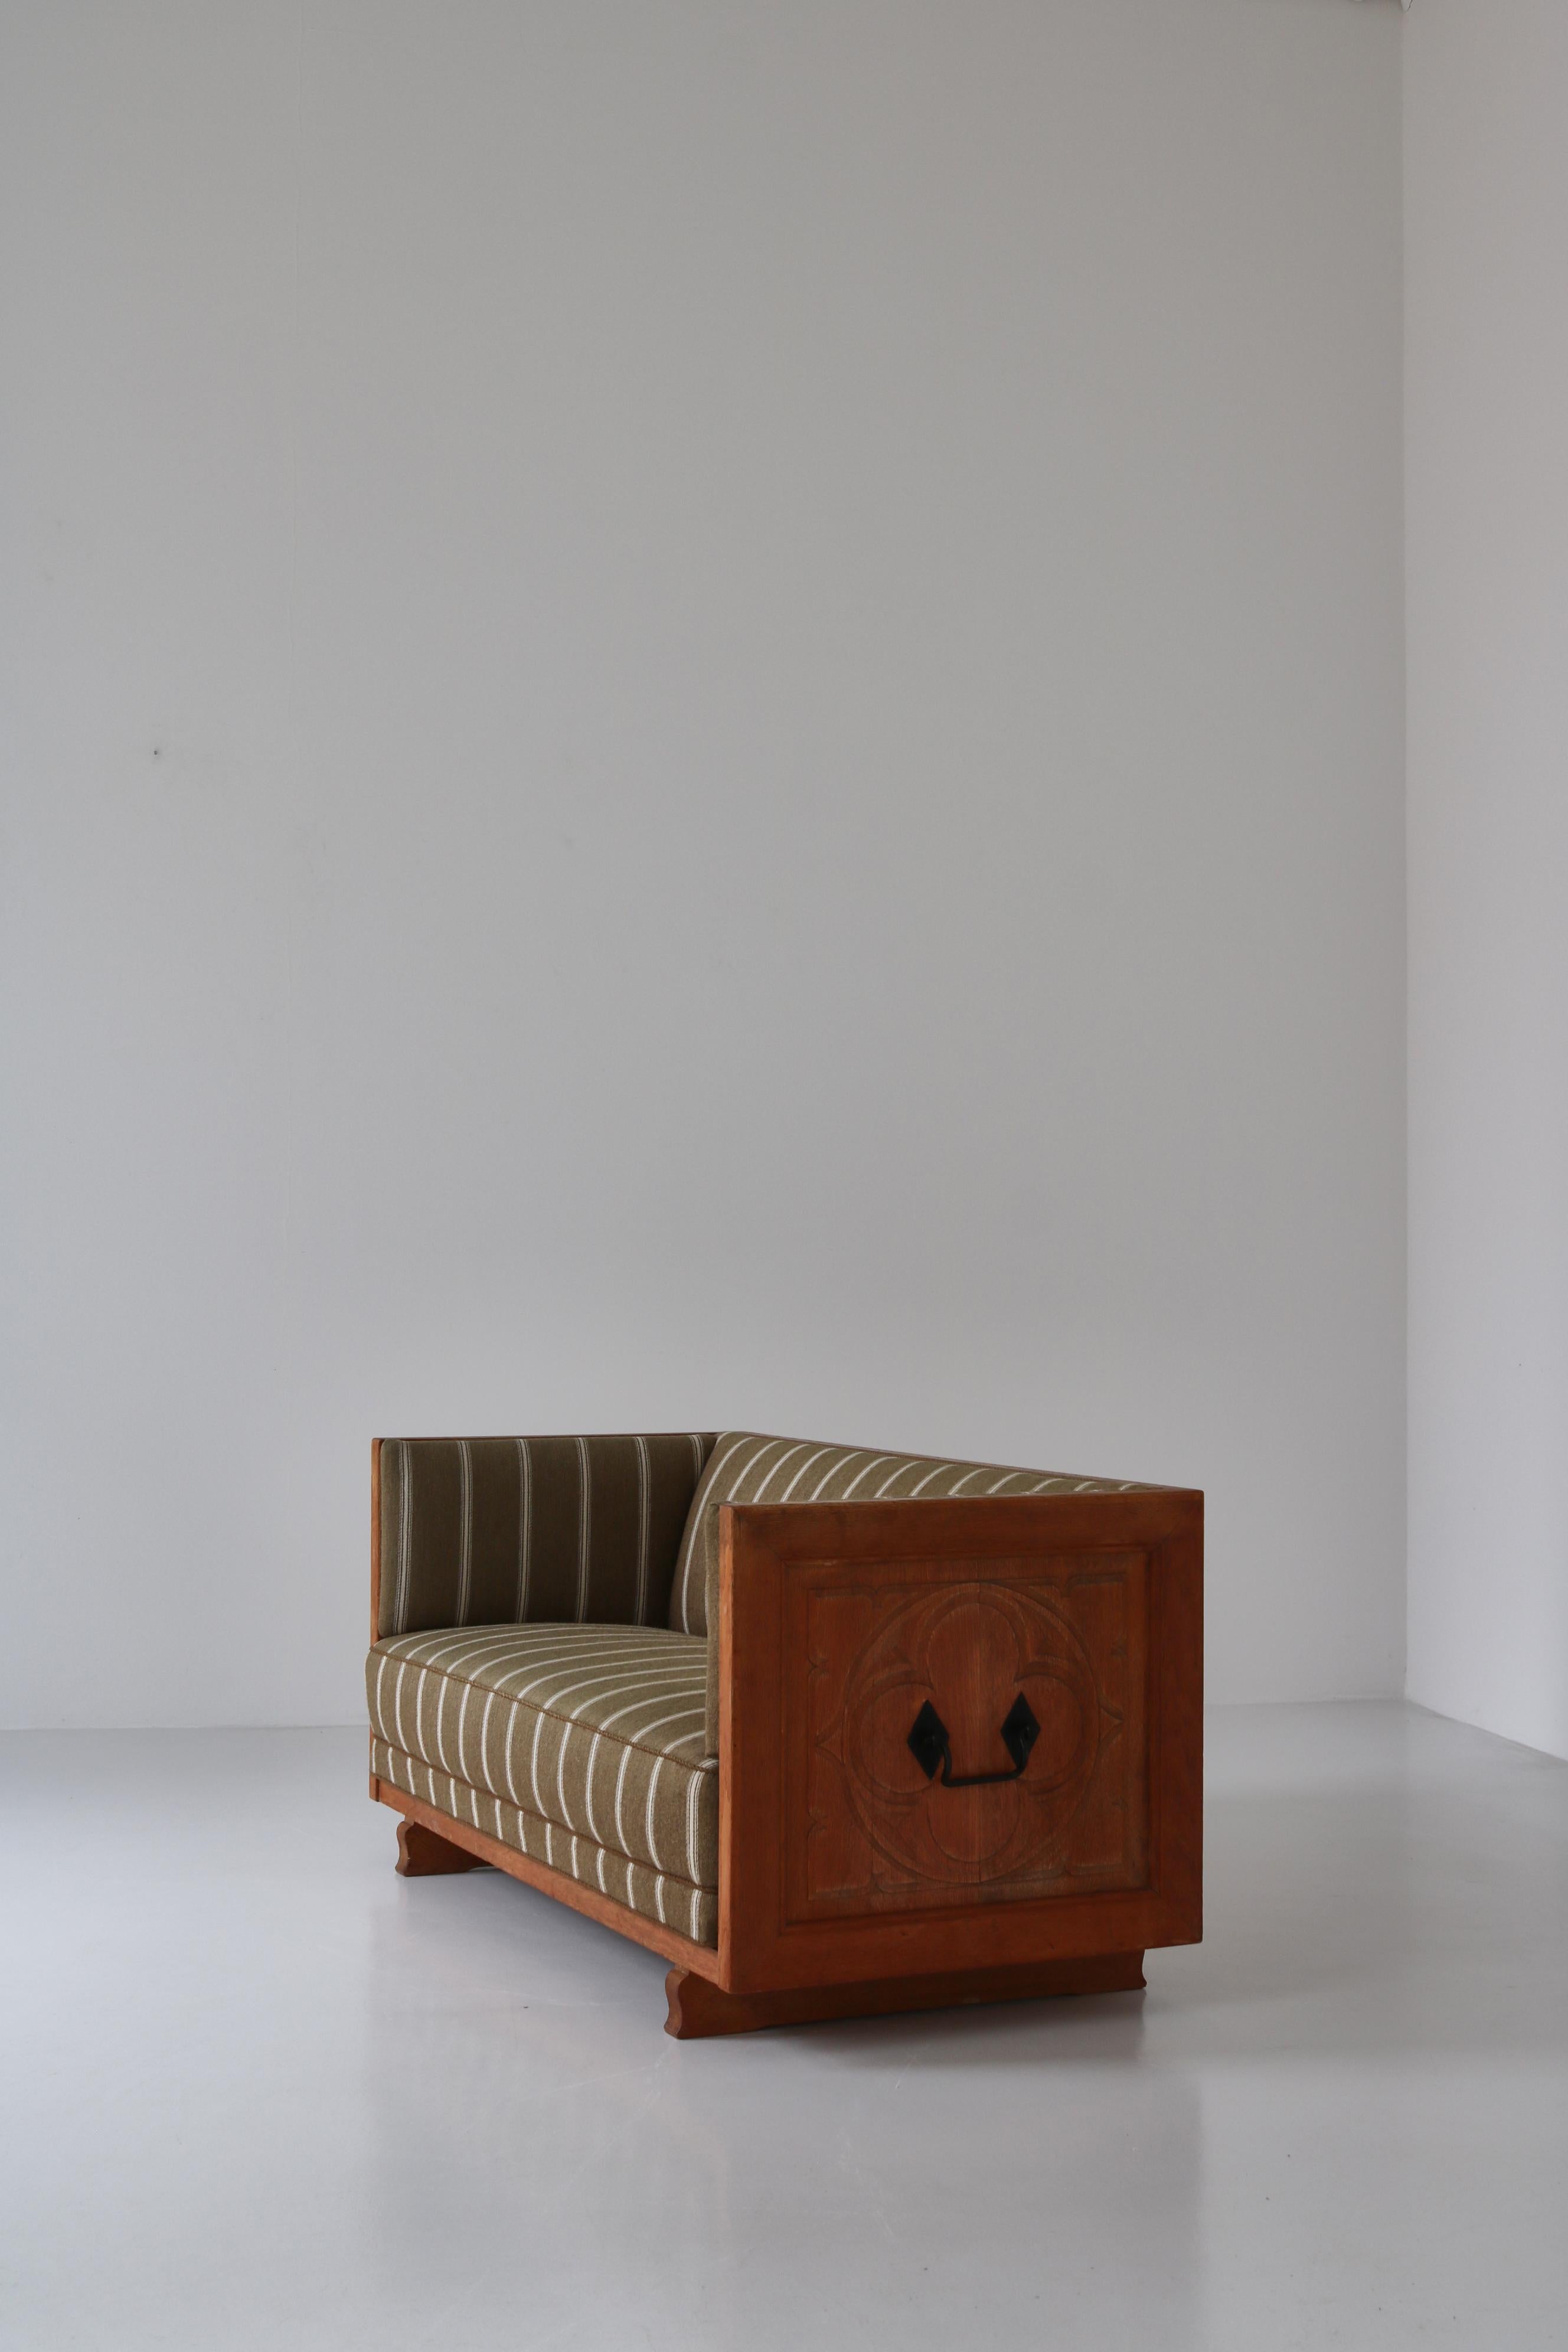 Rare and amazing sofa attributed to Danish architect Henning Kjærnulf made in Denmark in the 1960s. It is made from carved solid oak and upholstered in the original beautiful striped Savak Wool. The sofa is a modernist take on the traditional Danish